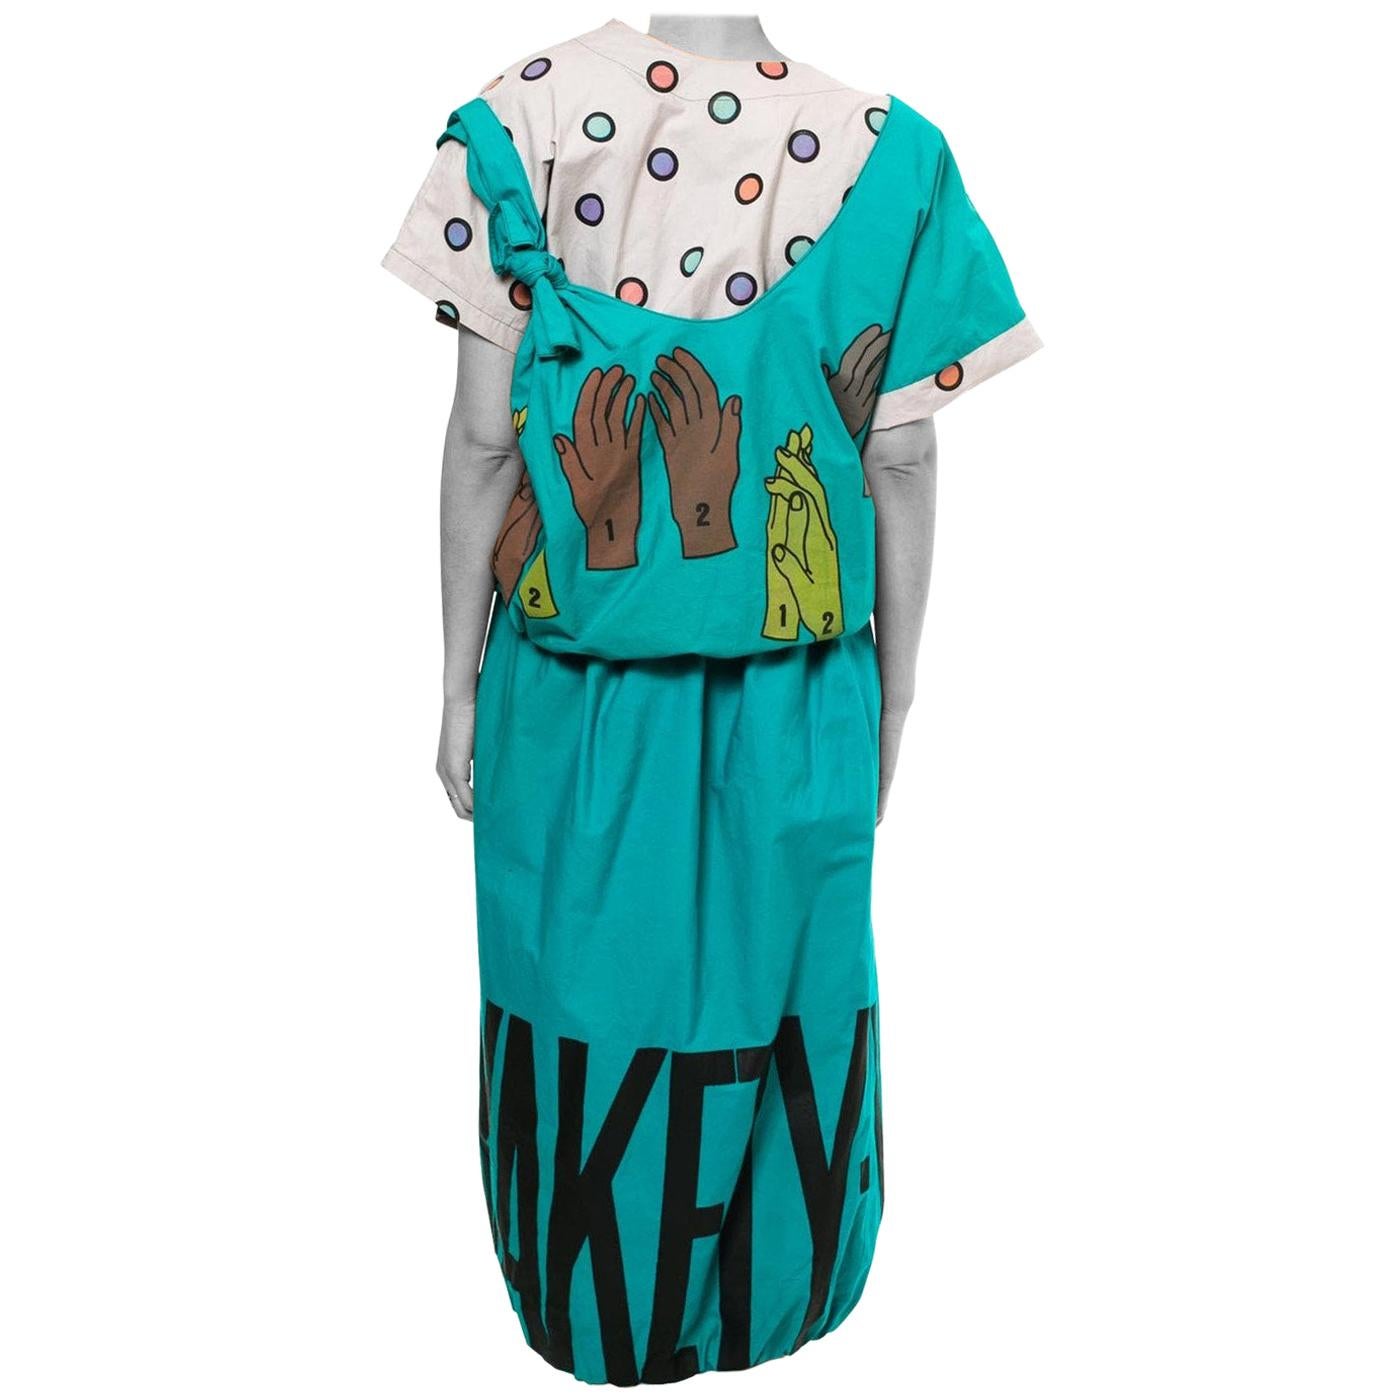 1980S Teal Cotton "Clap Your Hands Say Yakety-Yak!!" Shirt & Skirt Ensemble For Sale